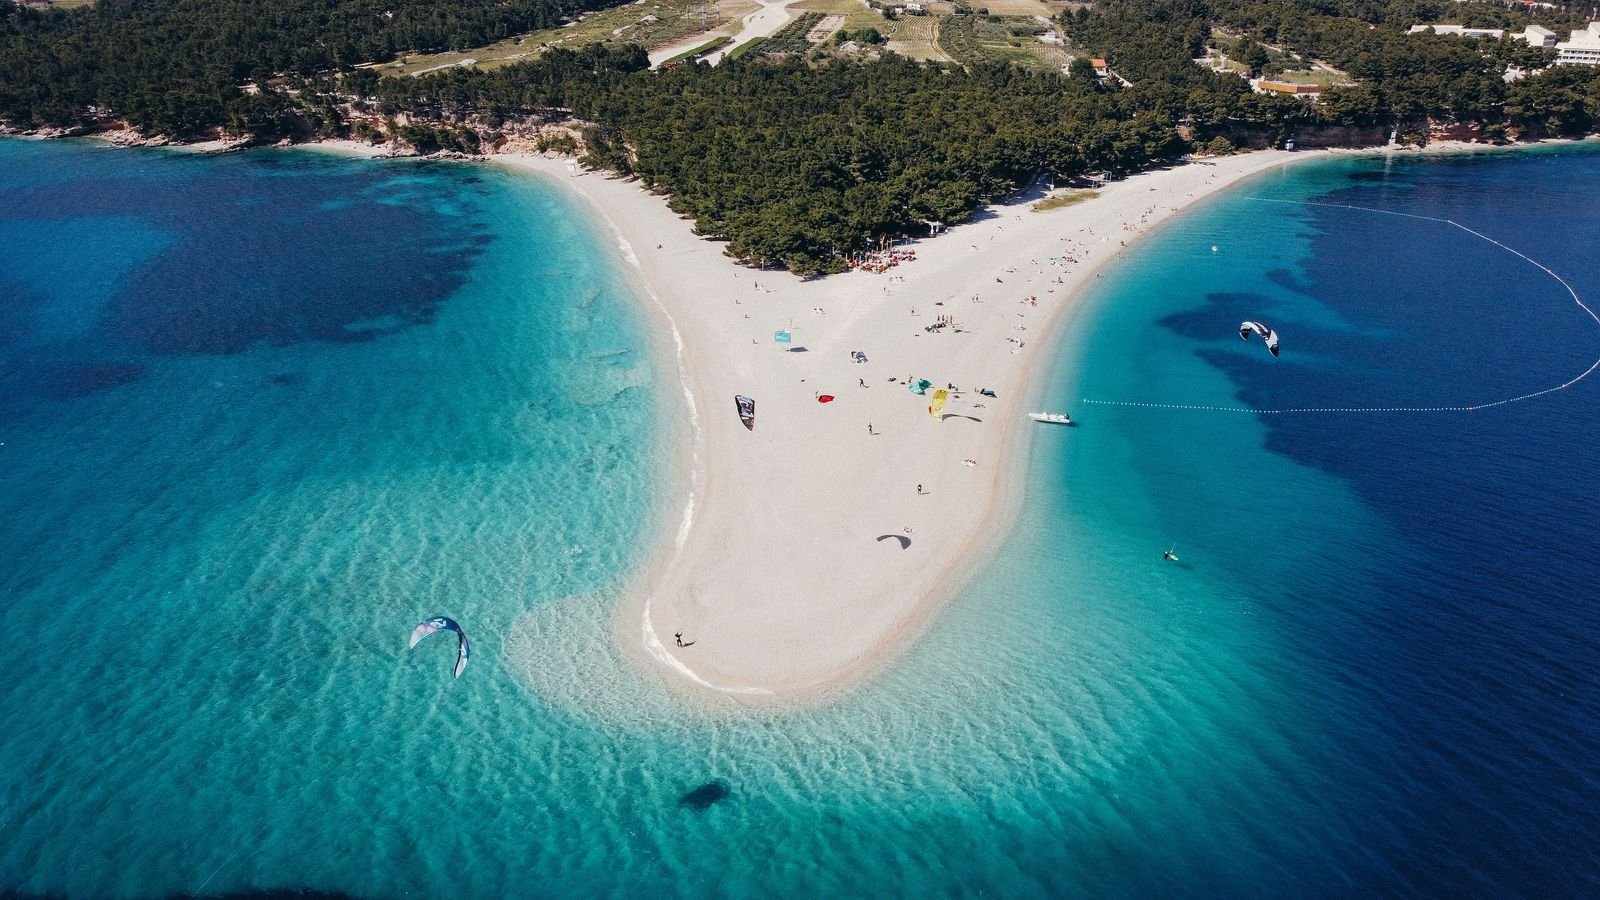 A drone photo looking down on a white sand bar beach surrounded by turquoise blue water. People can be seen on the beach and windsurfers in the water